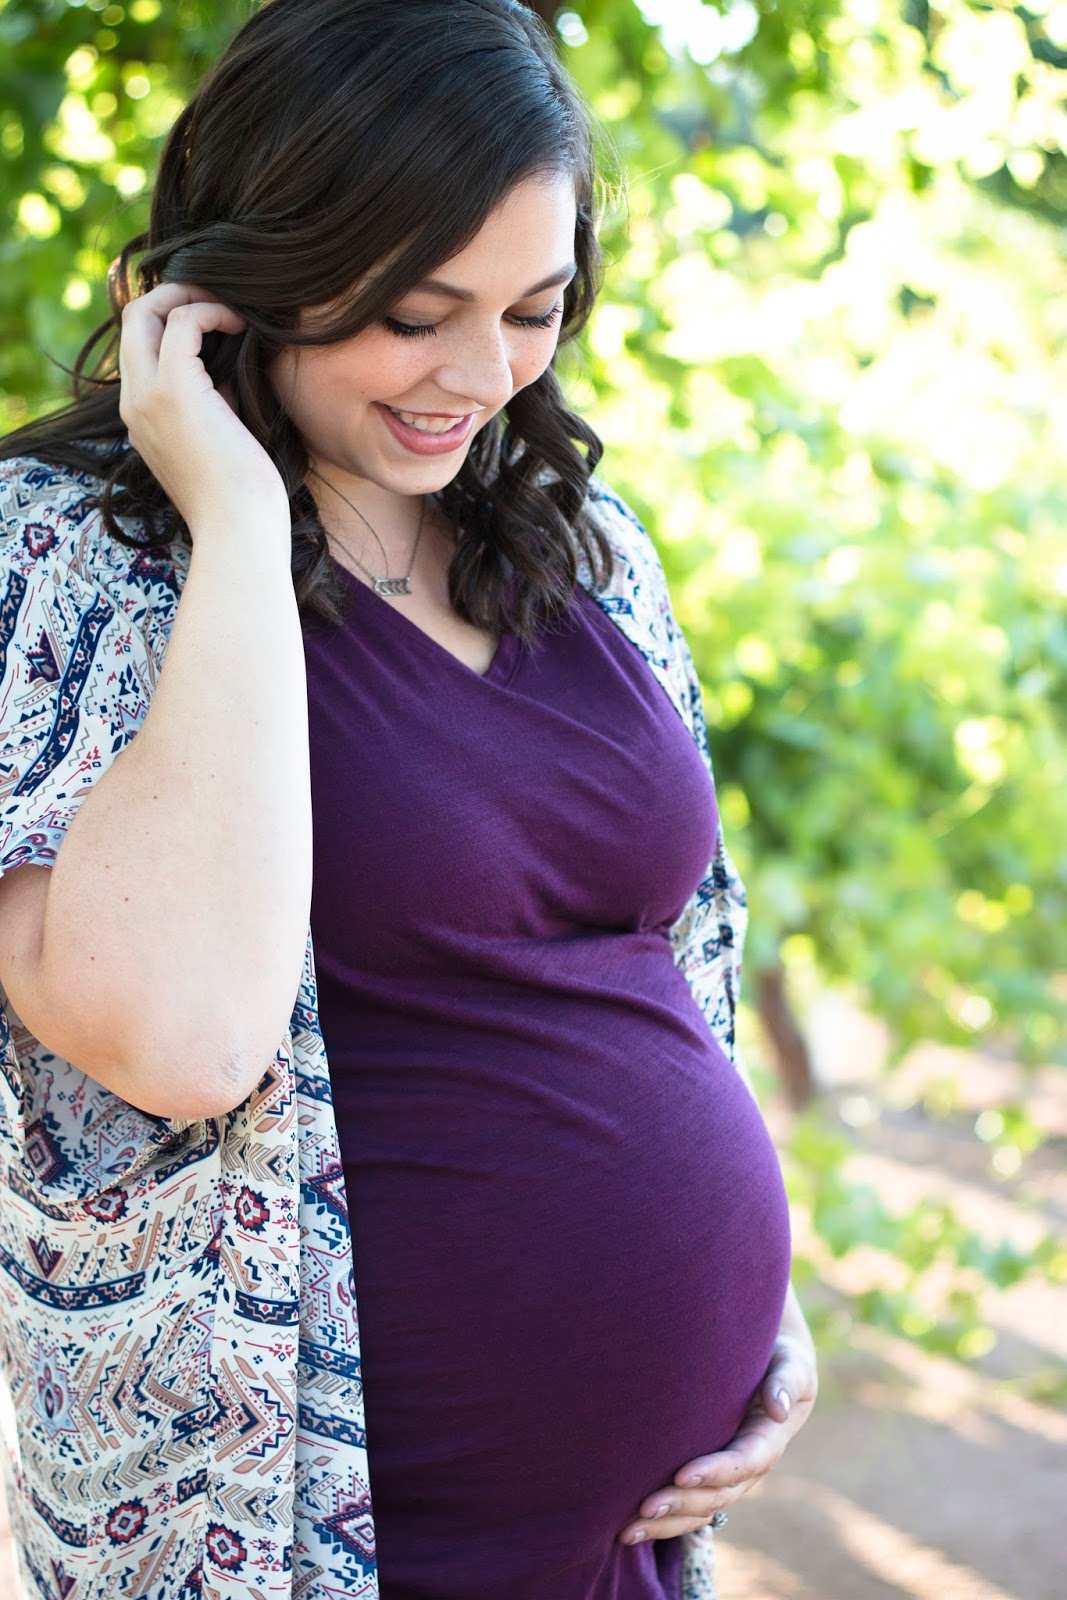 Silver Lining: a celebration (maternity pictures!)